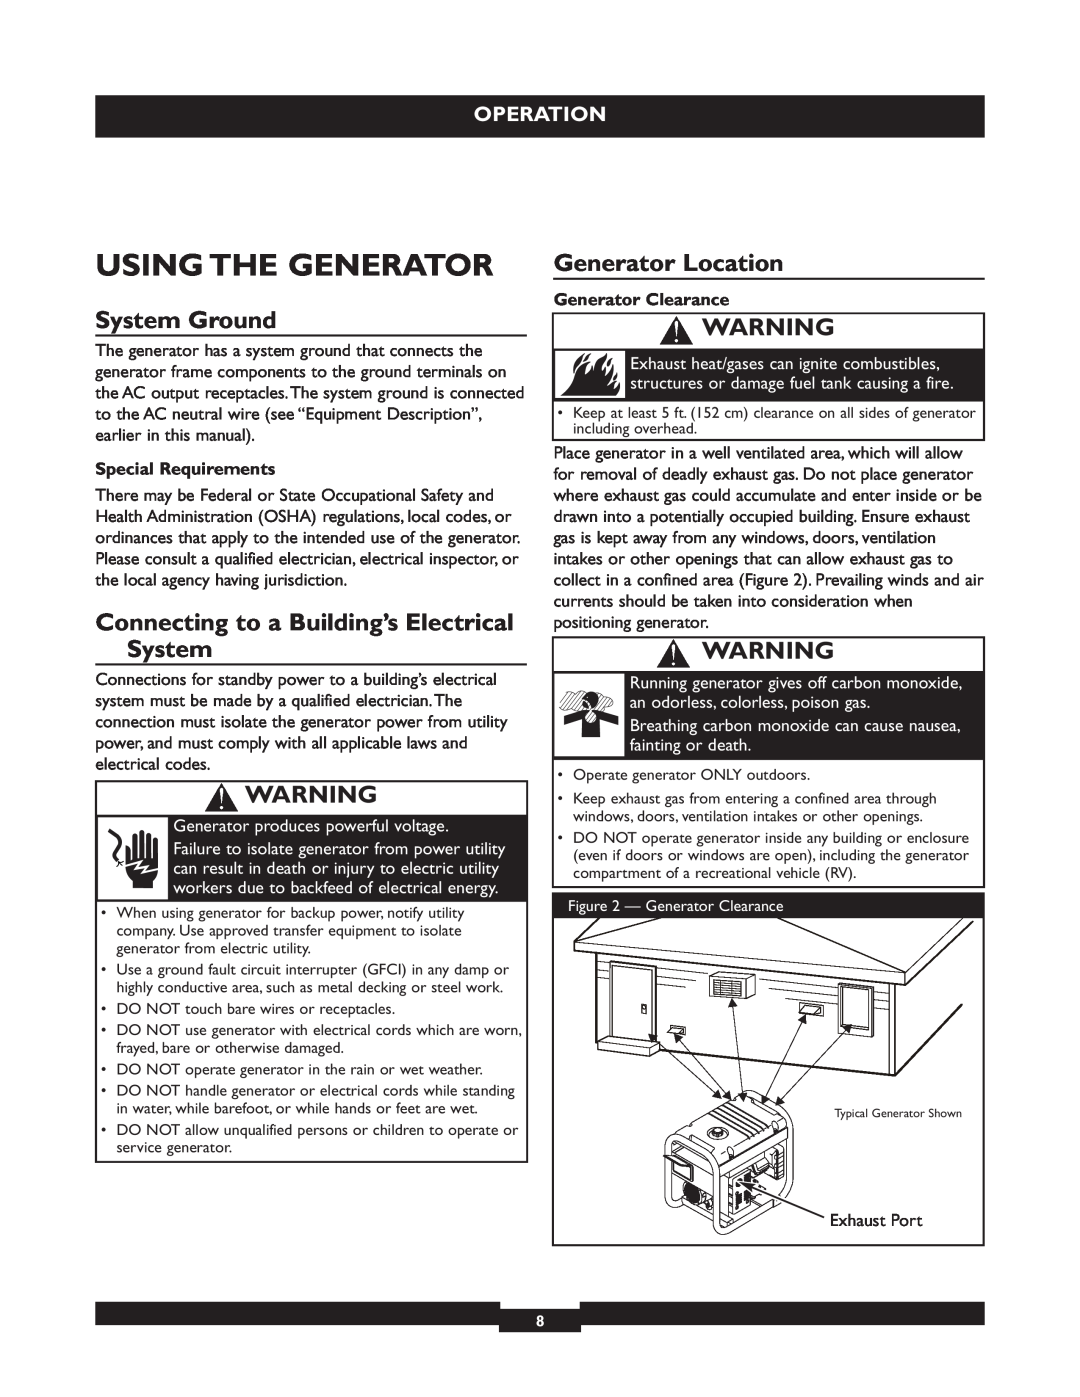 Briggs & Stratton 30236 Using The Generator, System Ground, Connecting to a Building’s Electrical System, Operation 